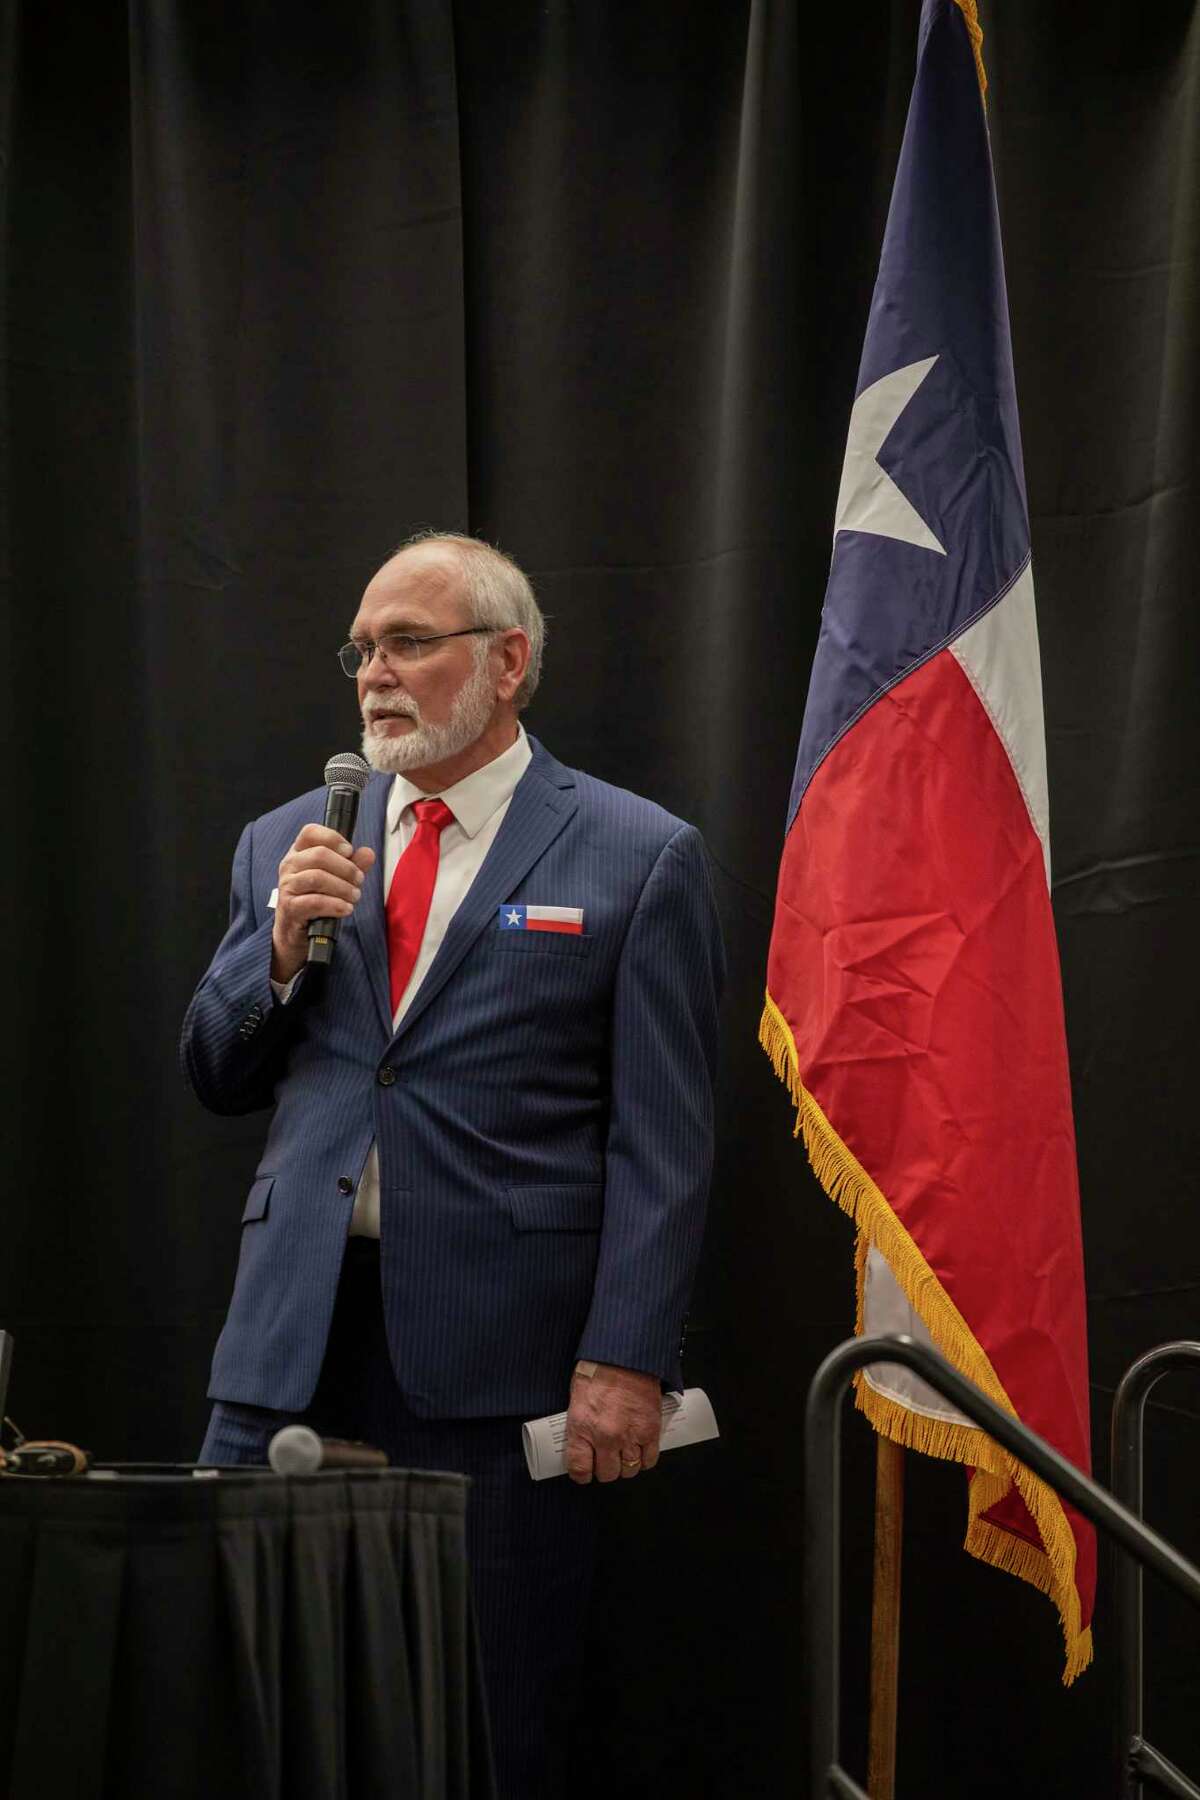 County judge Terry Johnson speaks during the Republican National Hispanic Assembly forum for county judges on Monday, Jan. 24, 2022 at the Bush Convention Center. Jacy Lewis/Reporter-Telegram